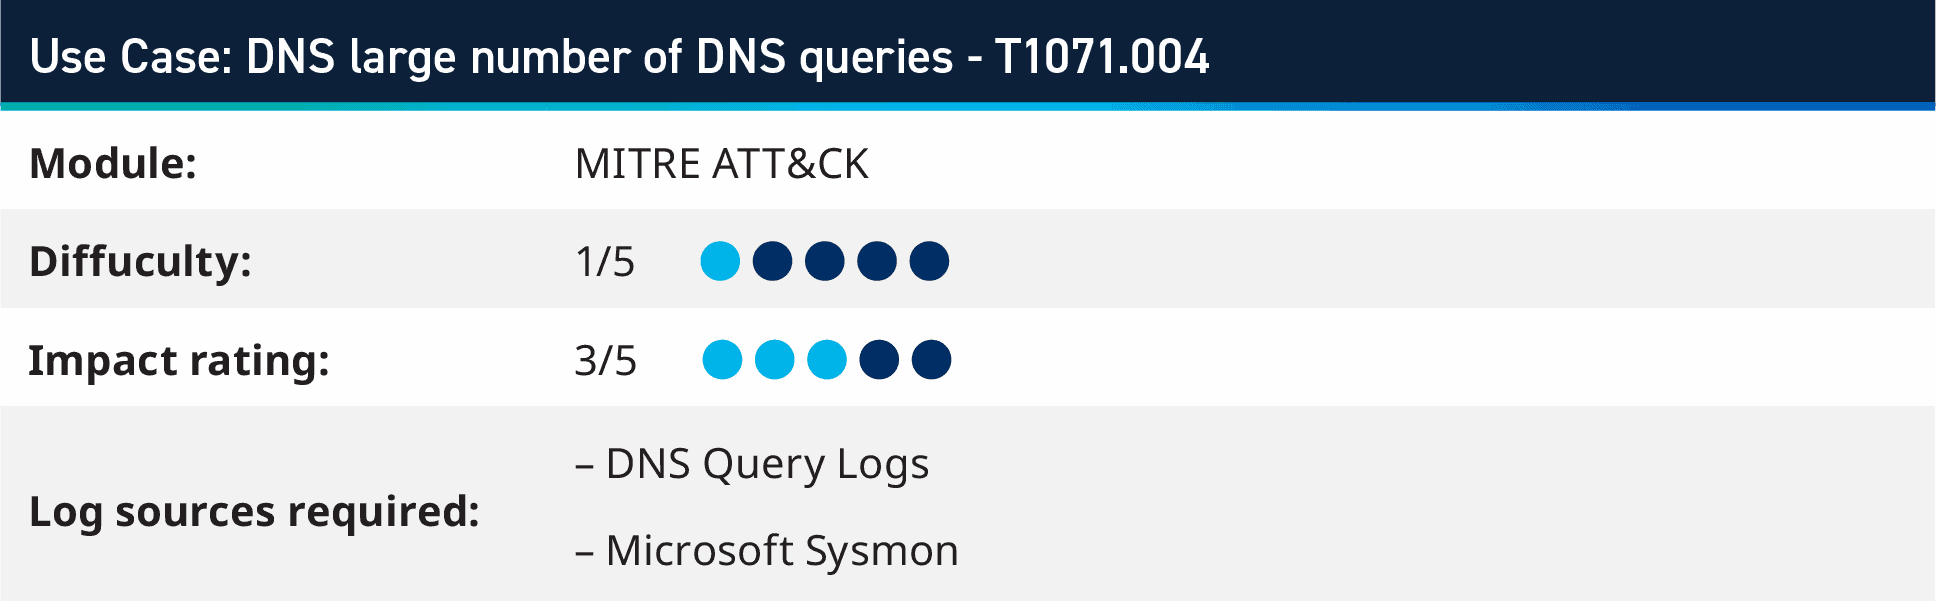 Security use case: DNS large number of DNS queries - T1071.004